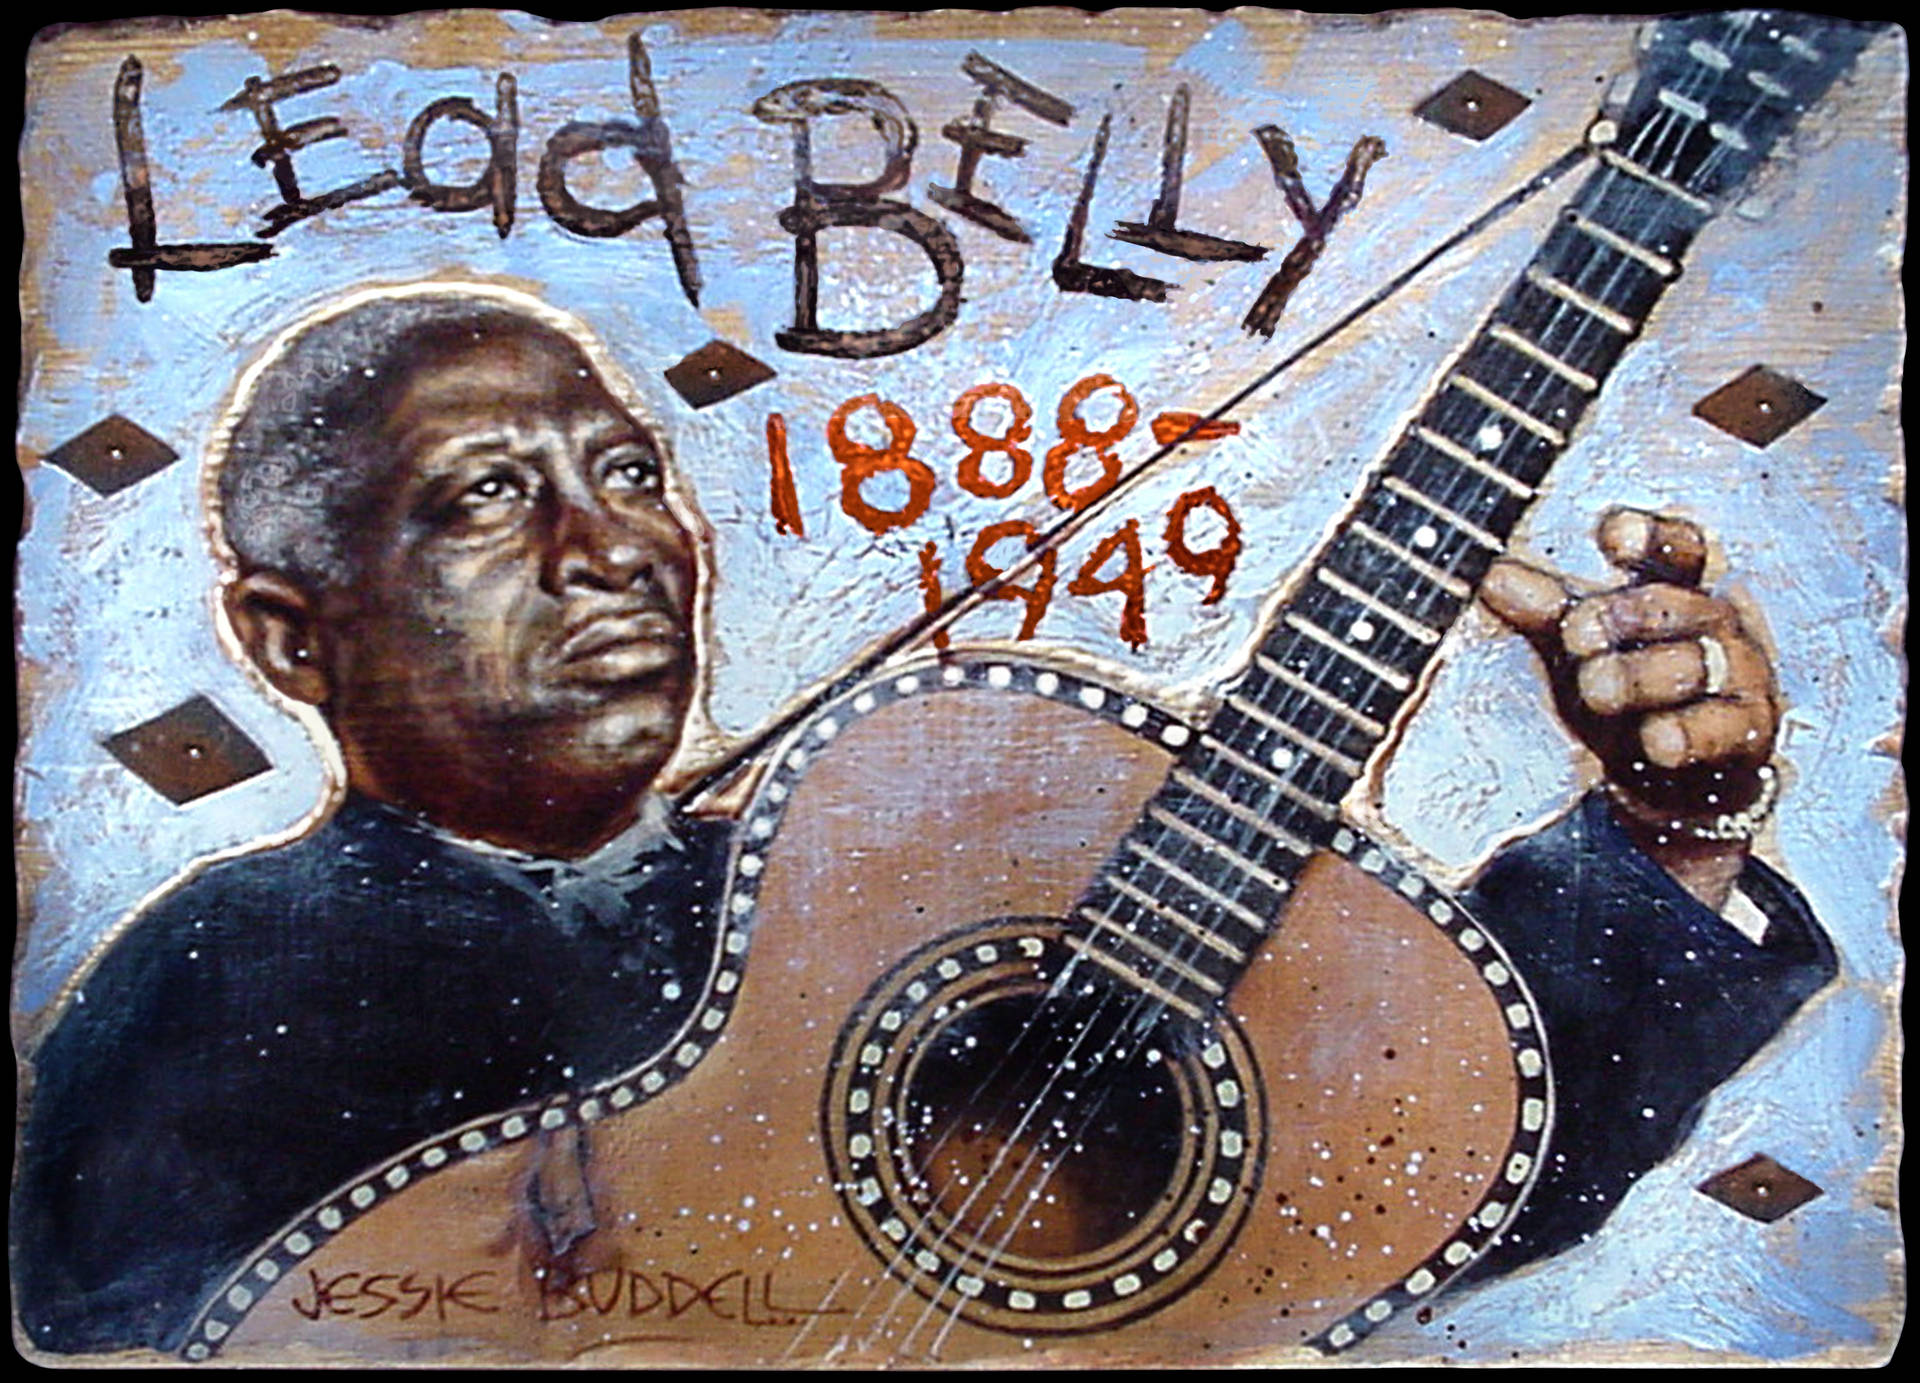 Black American Vocal Singer Leadbelly Painting Wallpaper